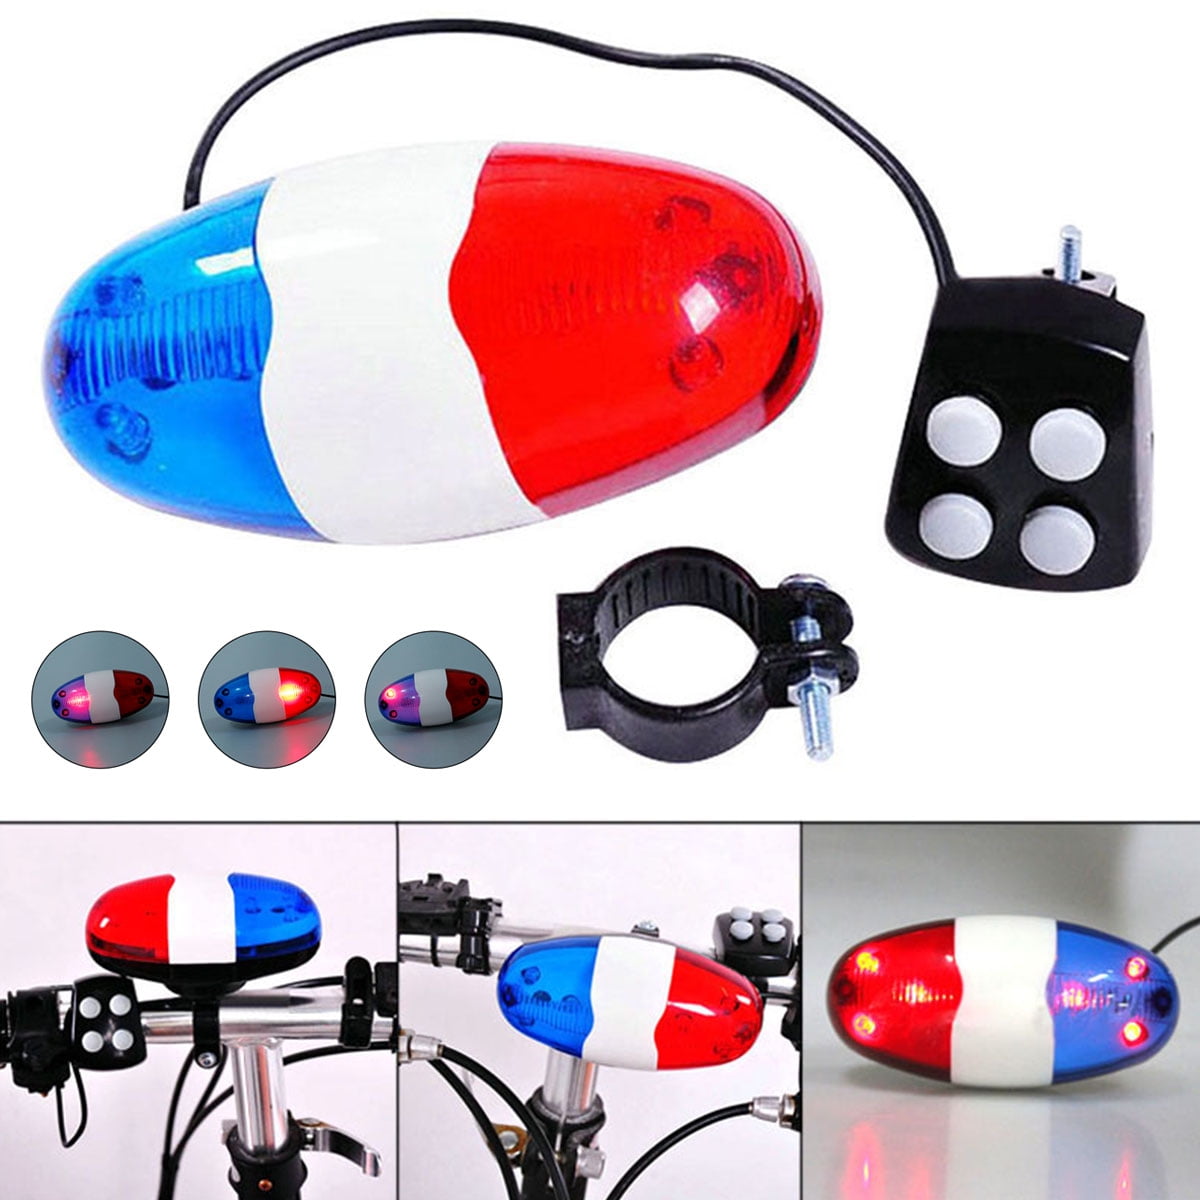 Bike Light with Siren 5 LED Bicycle Light Electric Horn Siren Horn 4 Sounds Trumpet Bell Police Sound Light